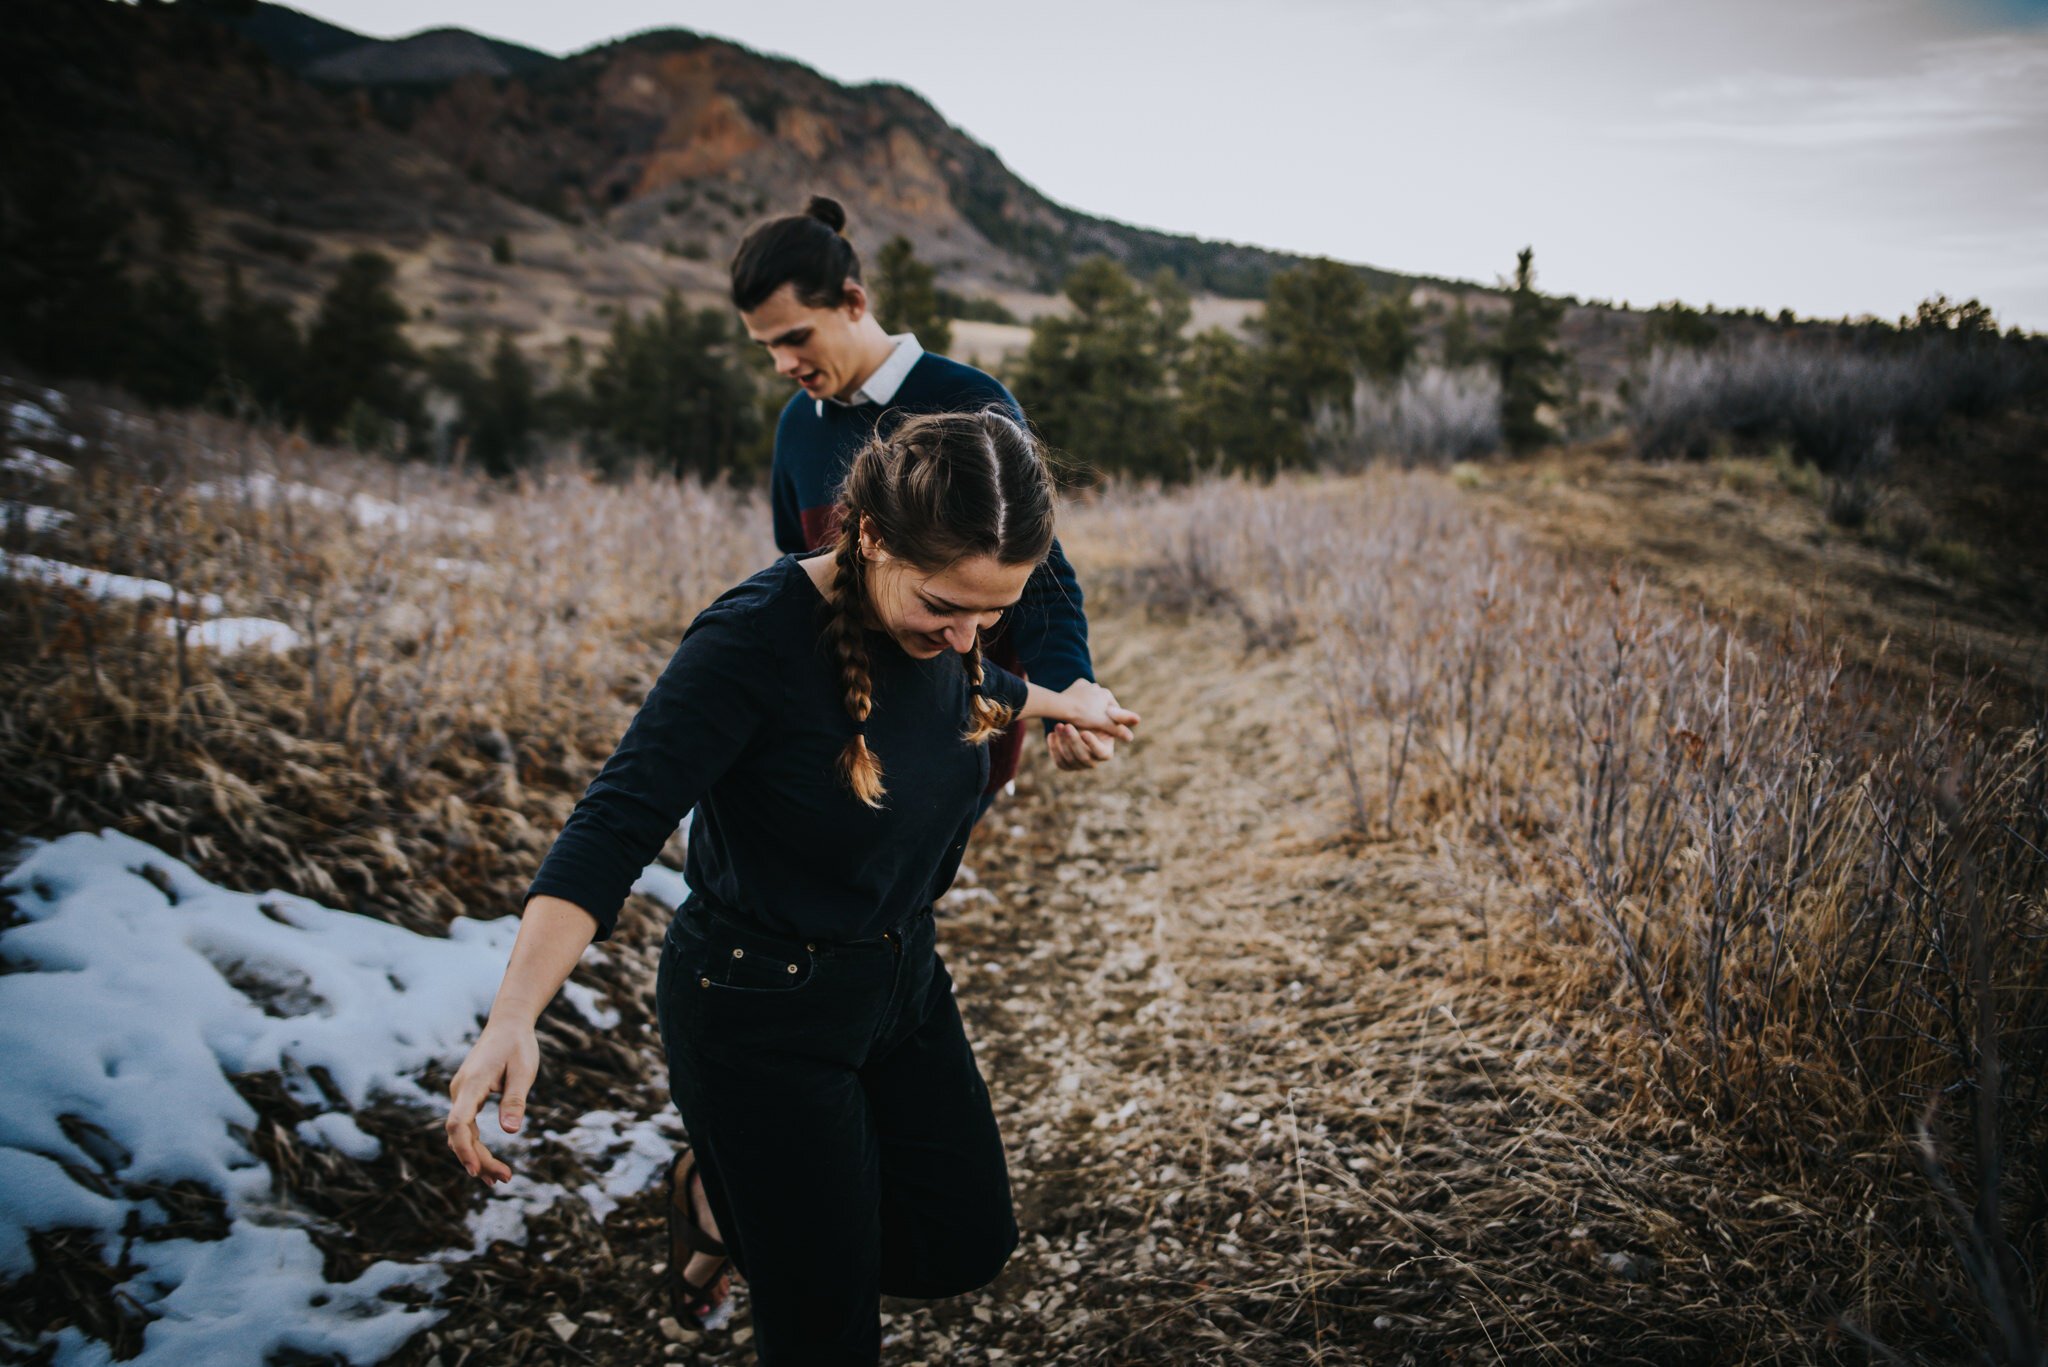 Yulia+and+Logan+Couples+Session+Colorado+Springs+Colorado+Sunset+Cheyenne+Canyon+Husband+Wife+Wild+Prairie+Photography-28-2020.jpeg